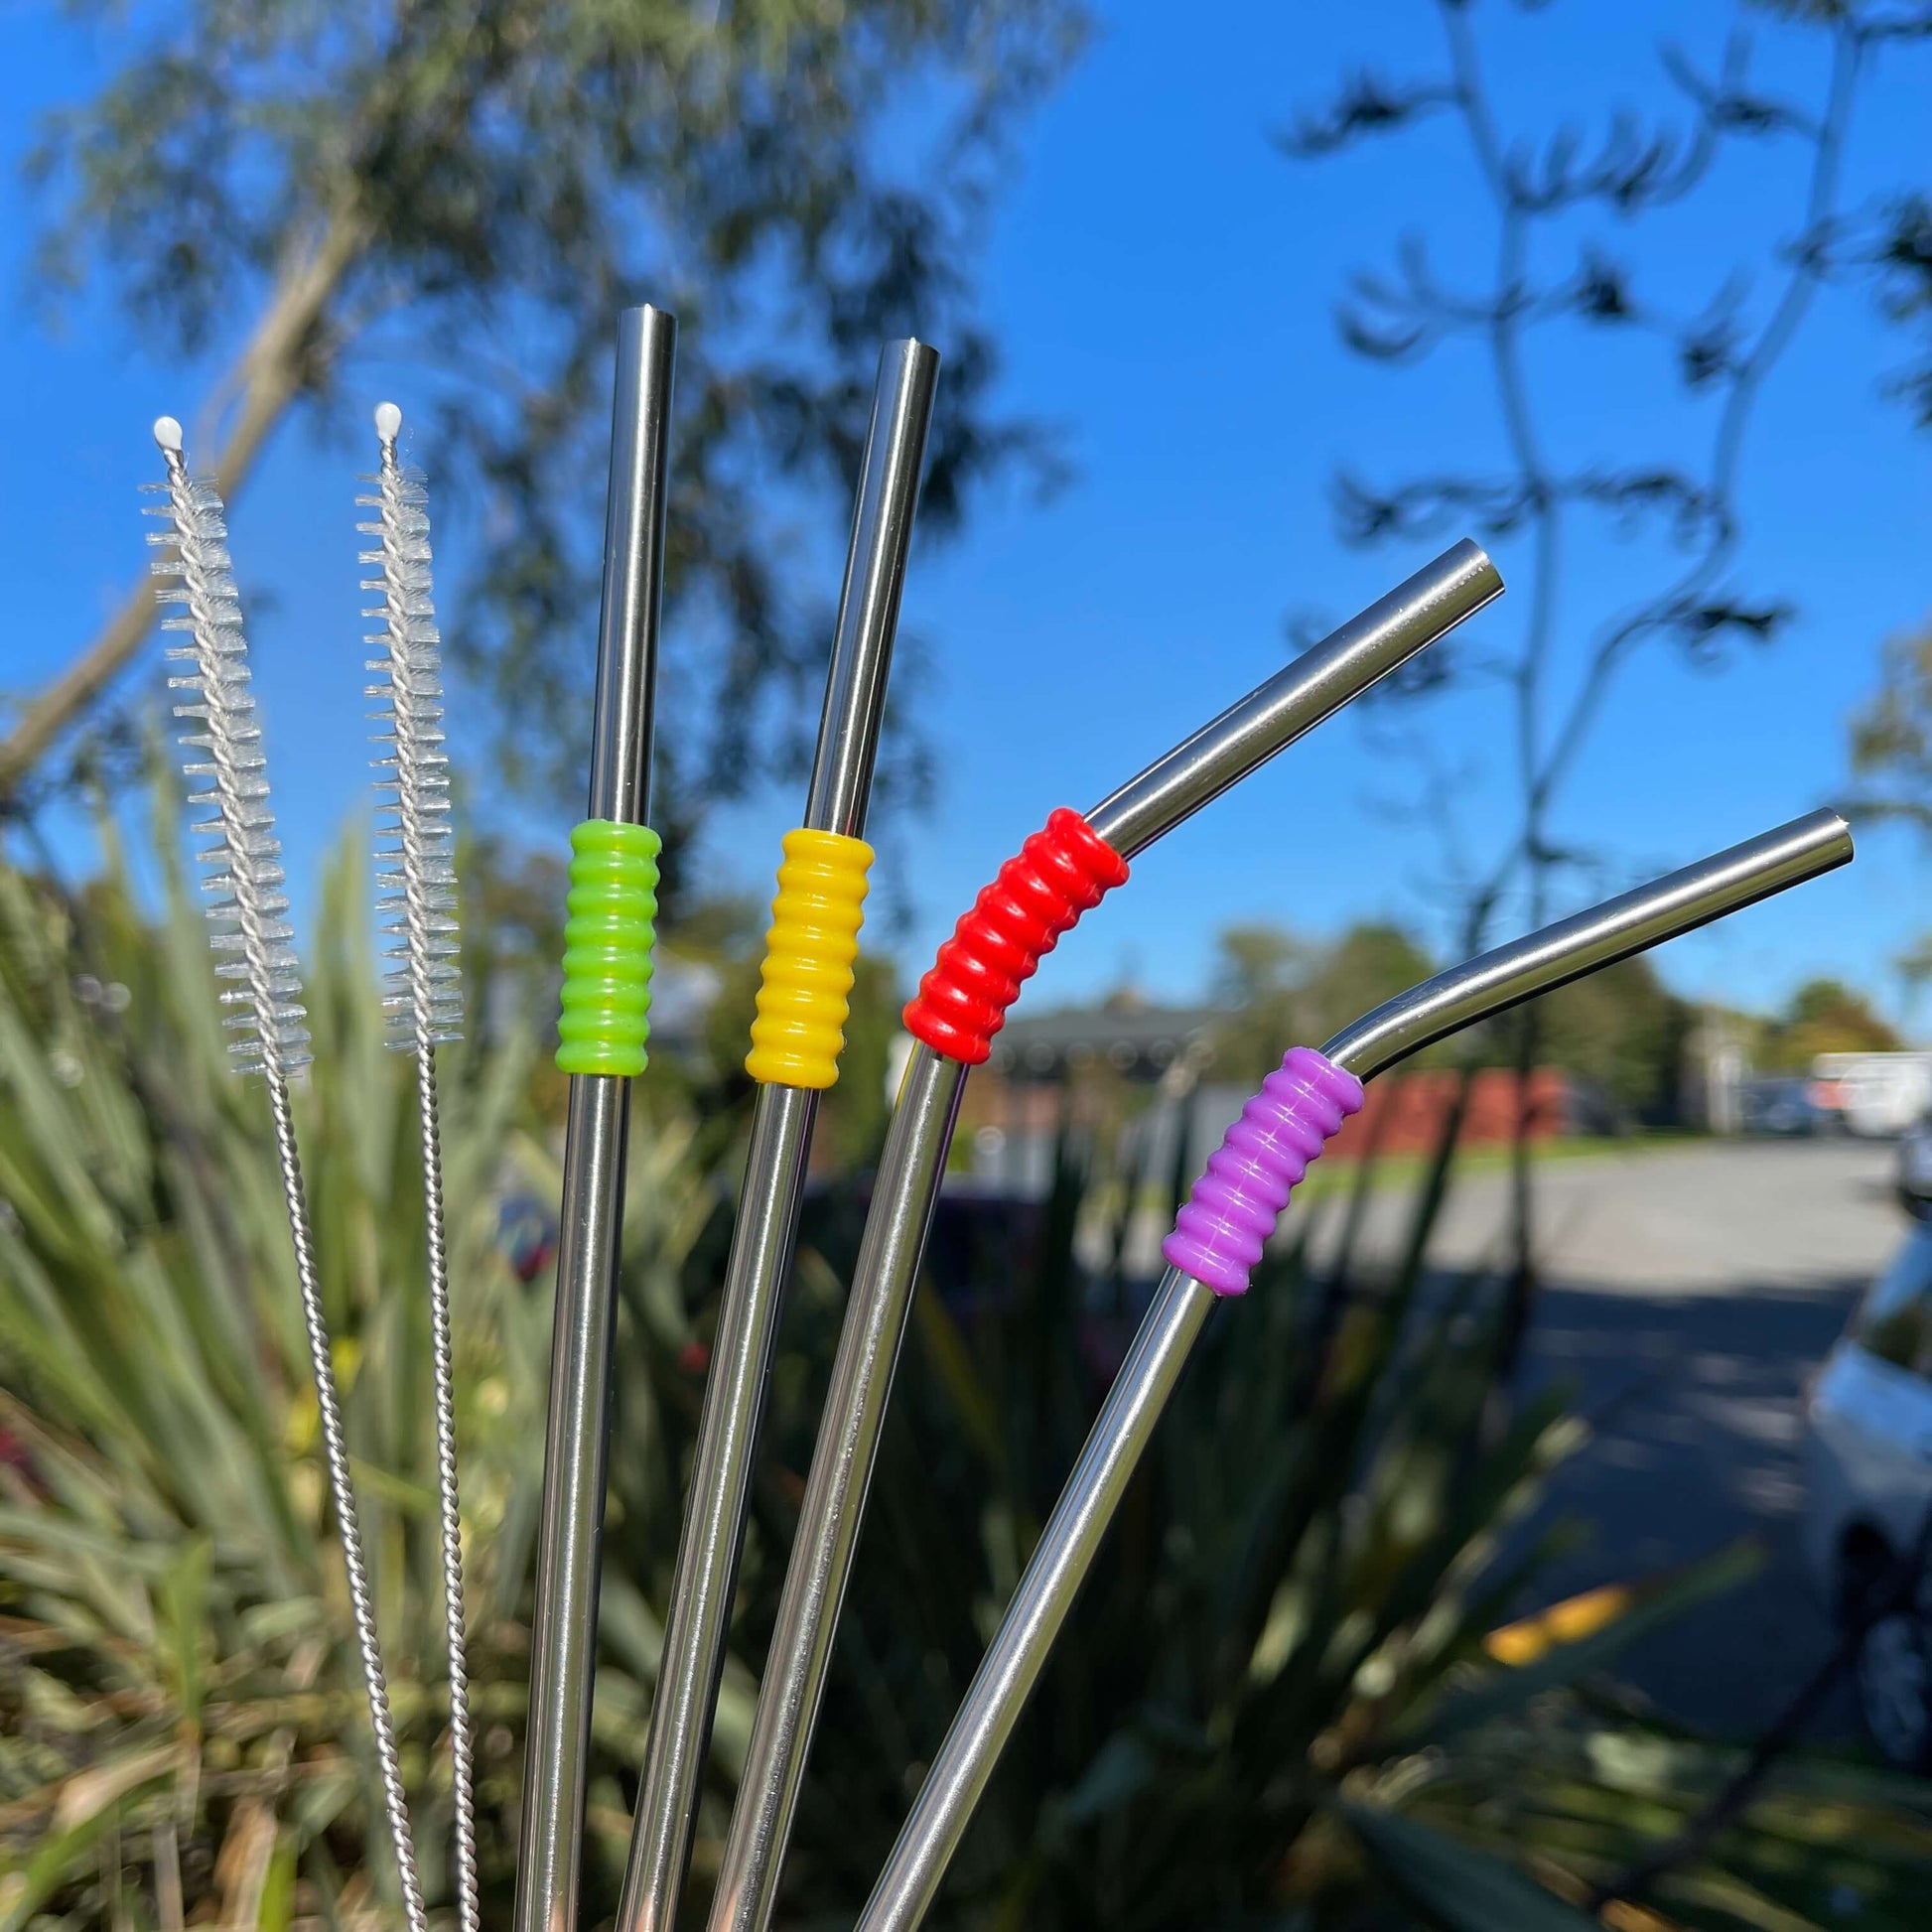 Set of 4 stainless steel reusable straws  and 2 cleaning brushes with a beautiful blue day in the background.